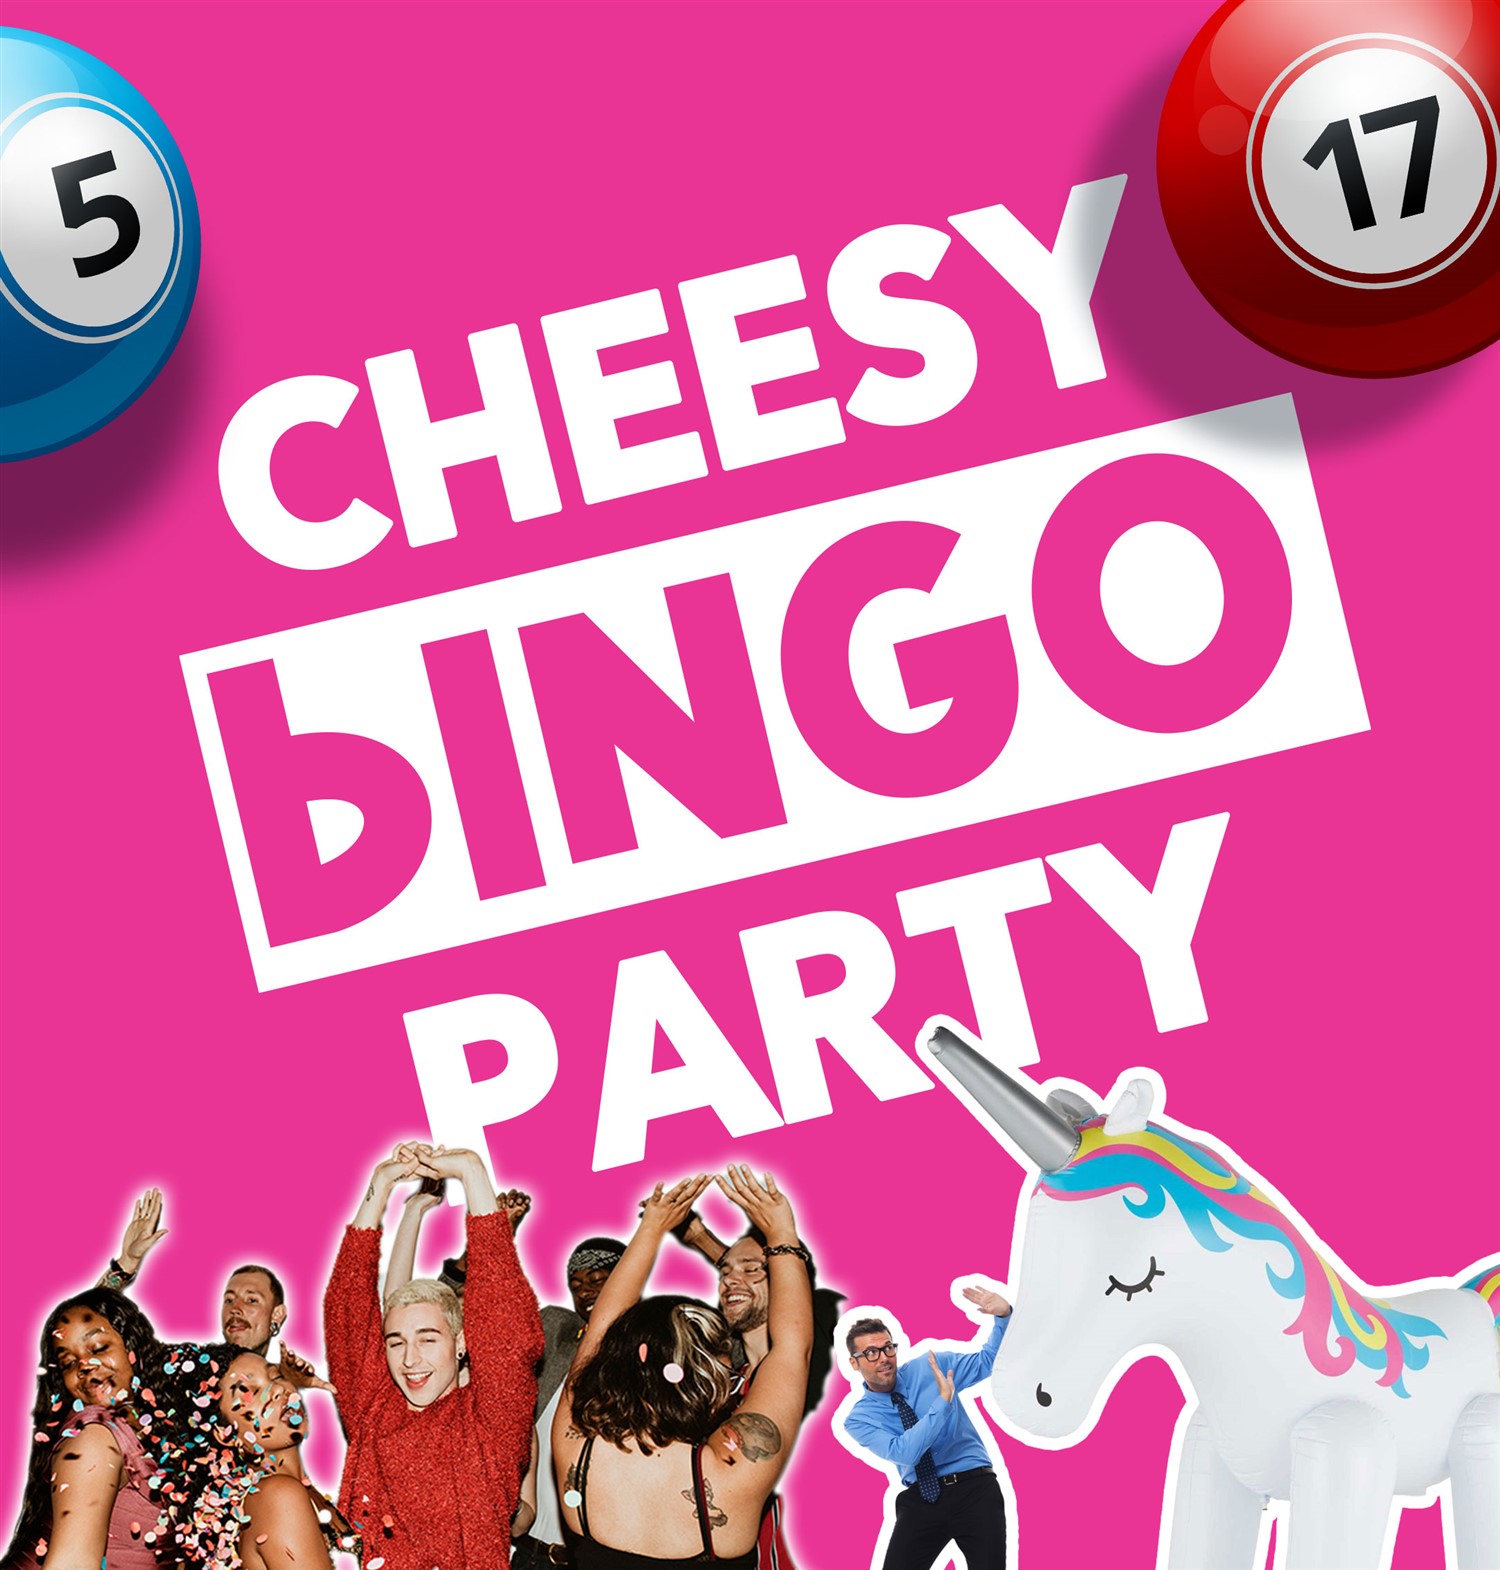 Cheesy Bingo Party  on Mar 02, 19:30@Sutton Coldfield Town Hall - General Admission - Buy tickets and Get information on Sutton Coldfield Town Hall 